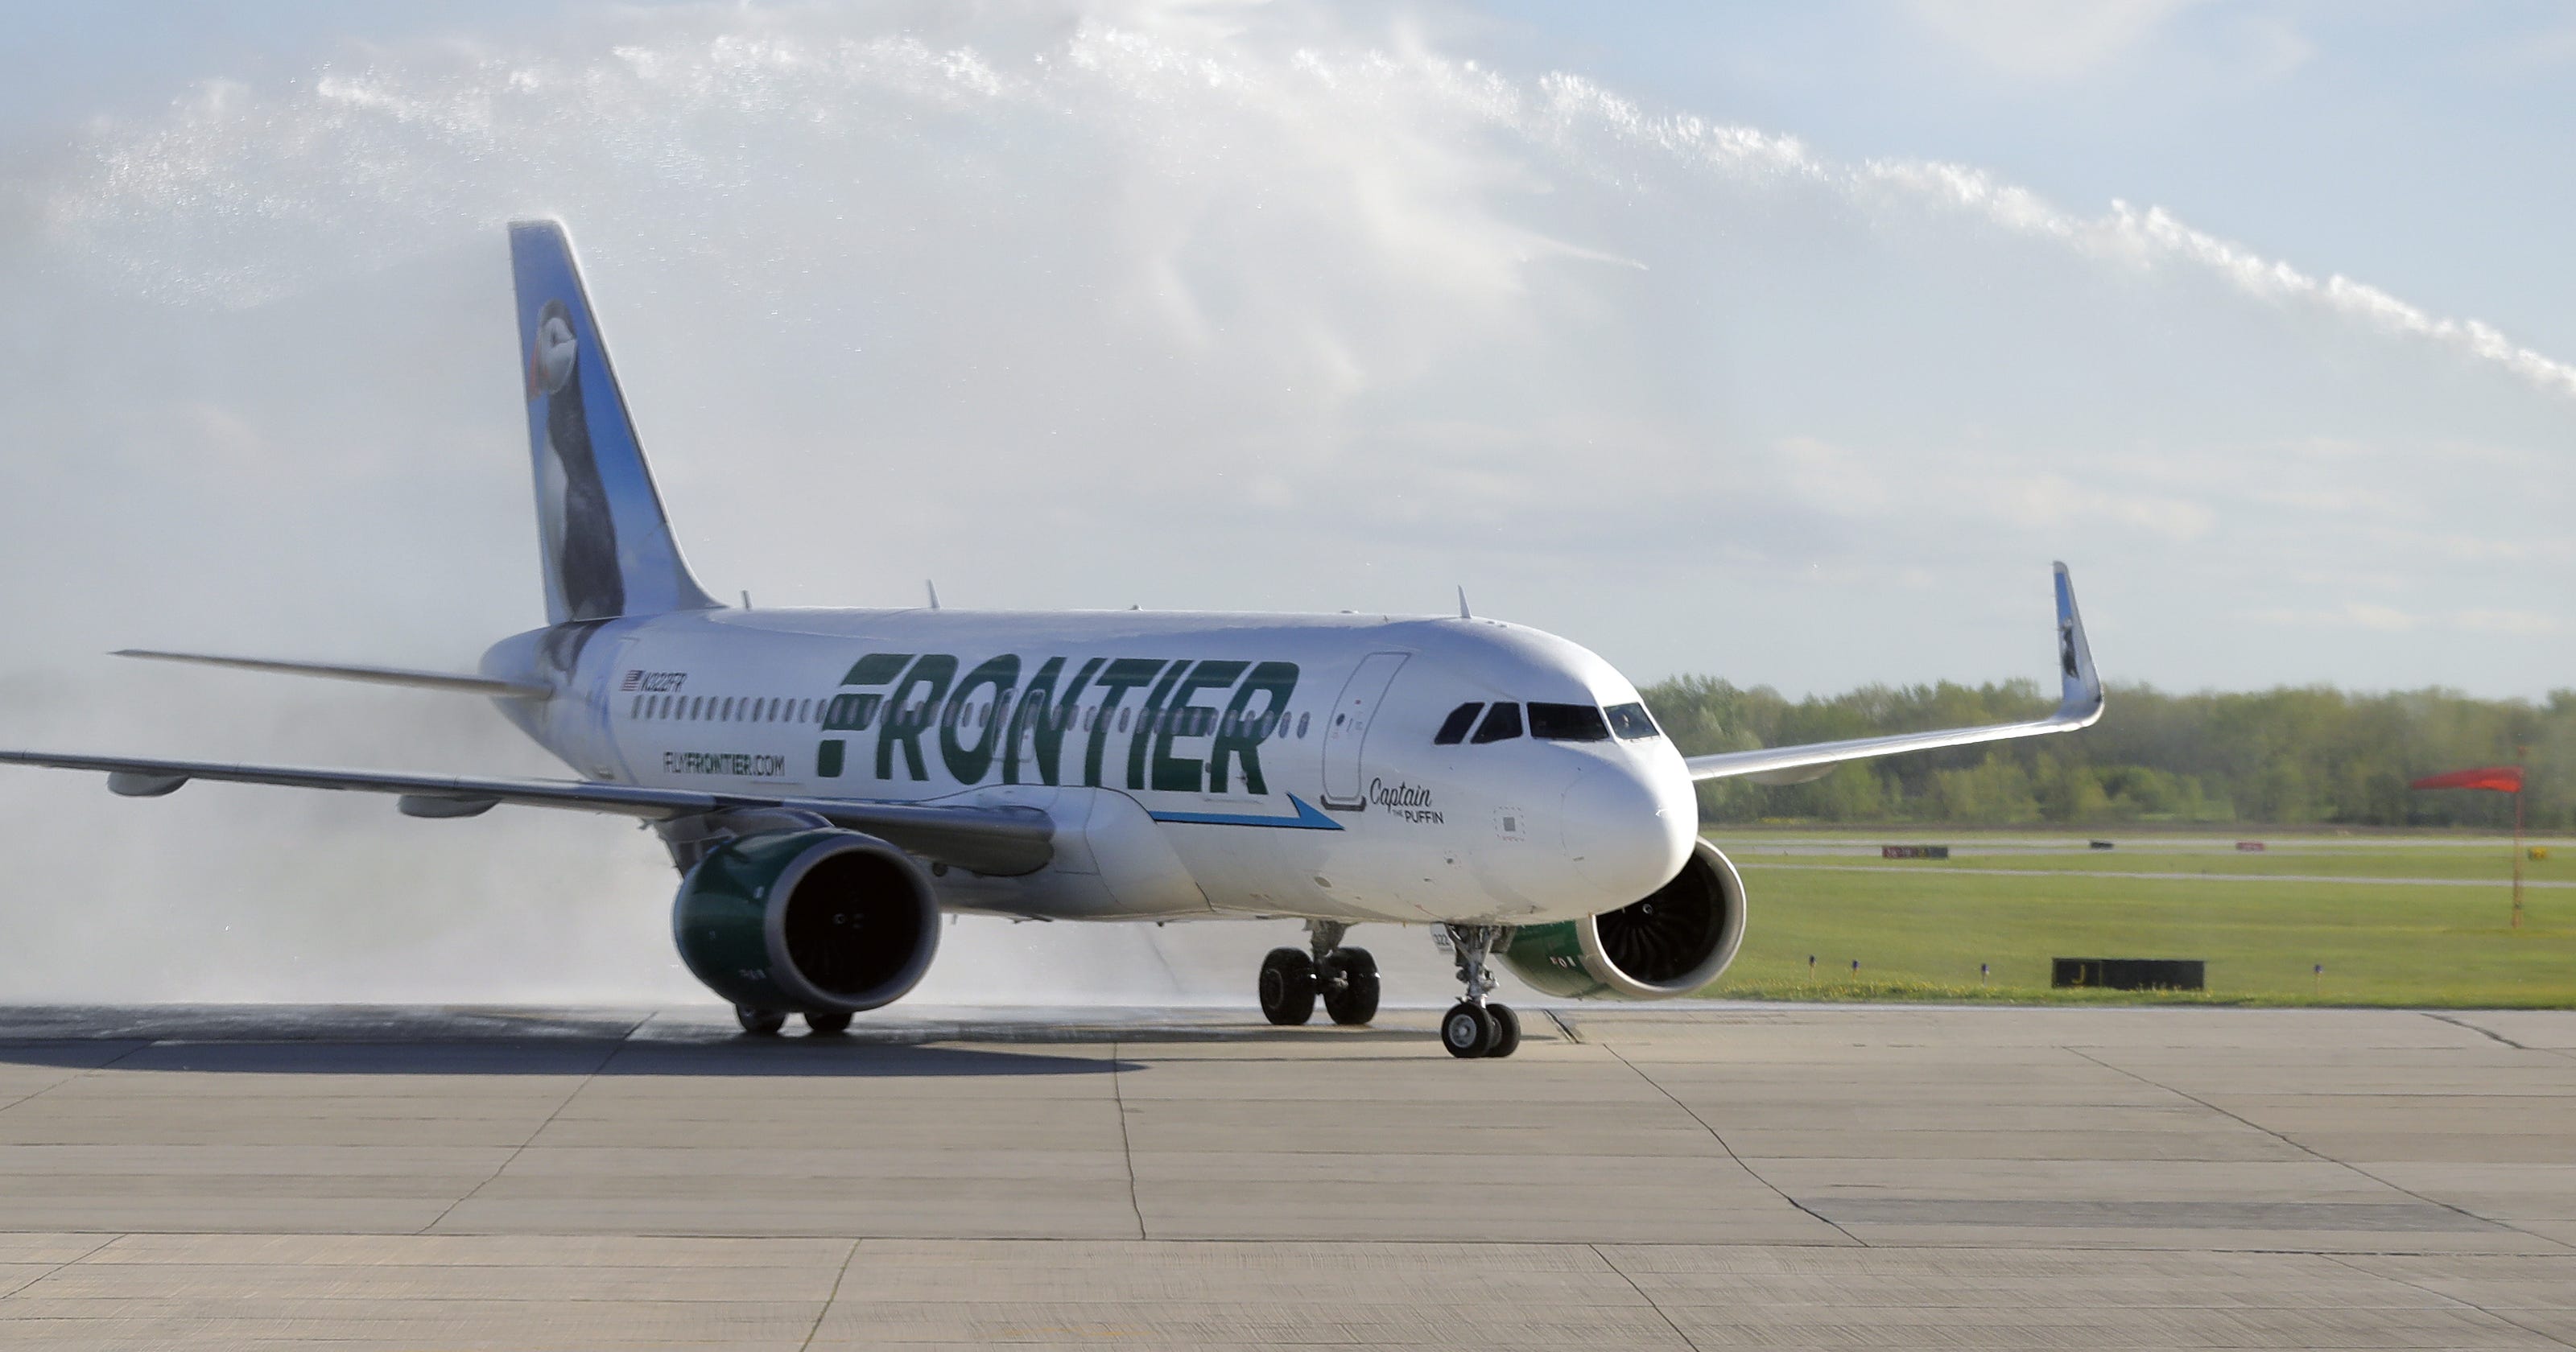 Orlando Frontier Airlines To Offer Flights From Green Bay